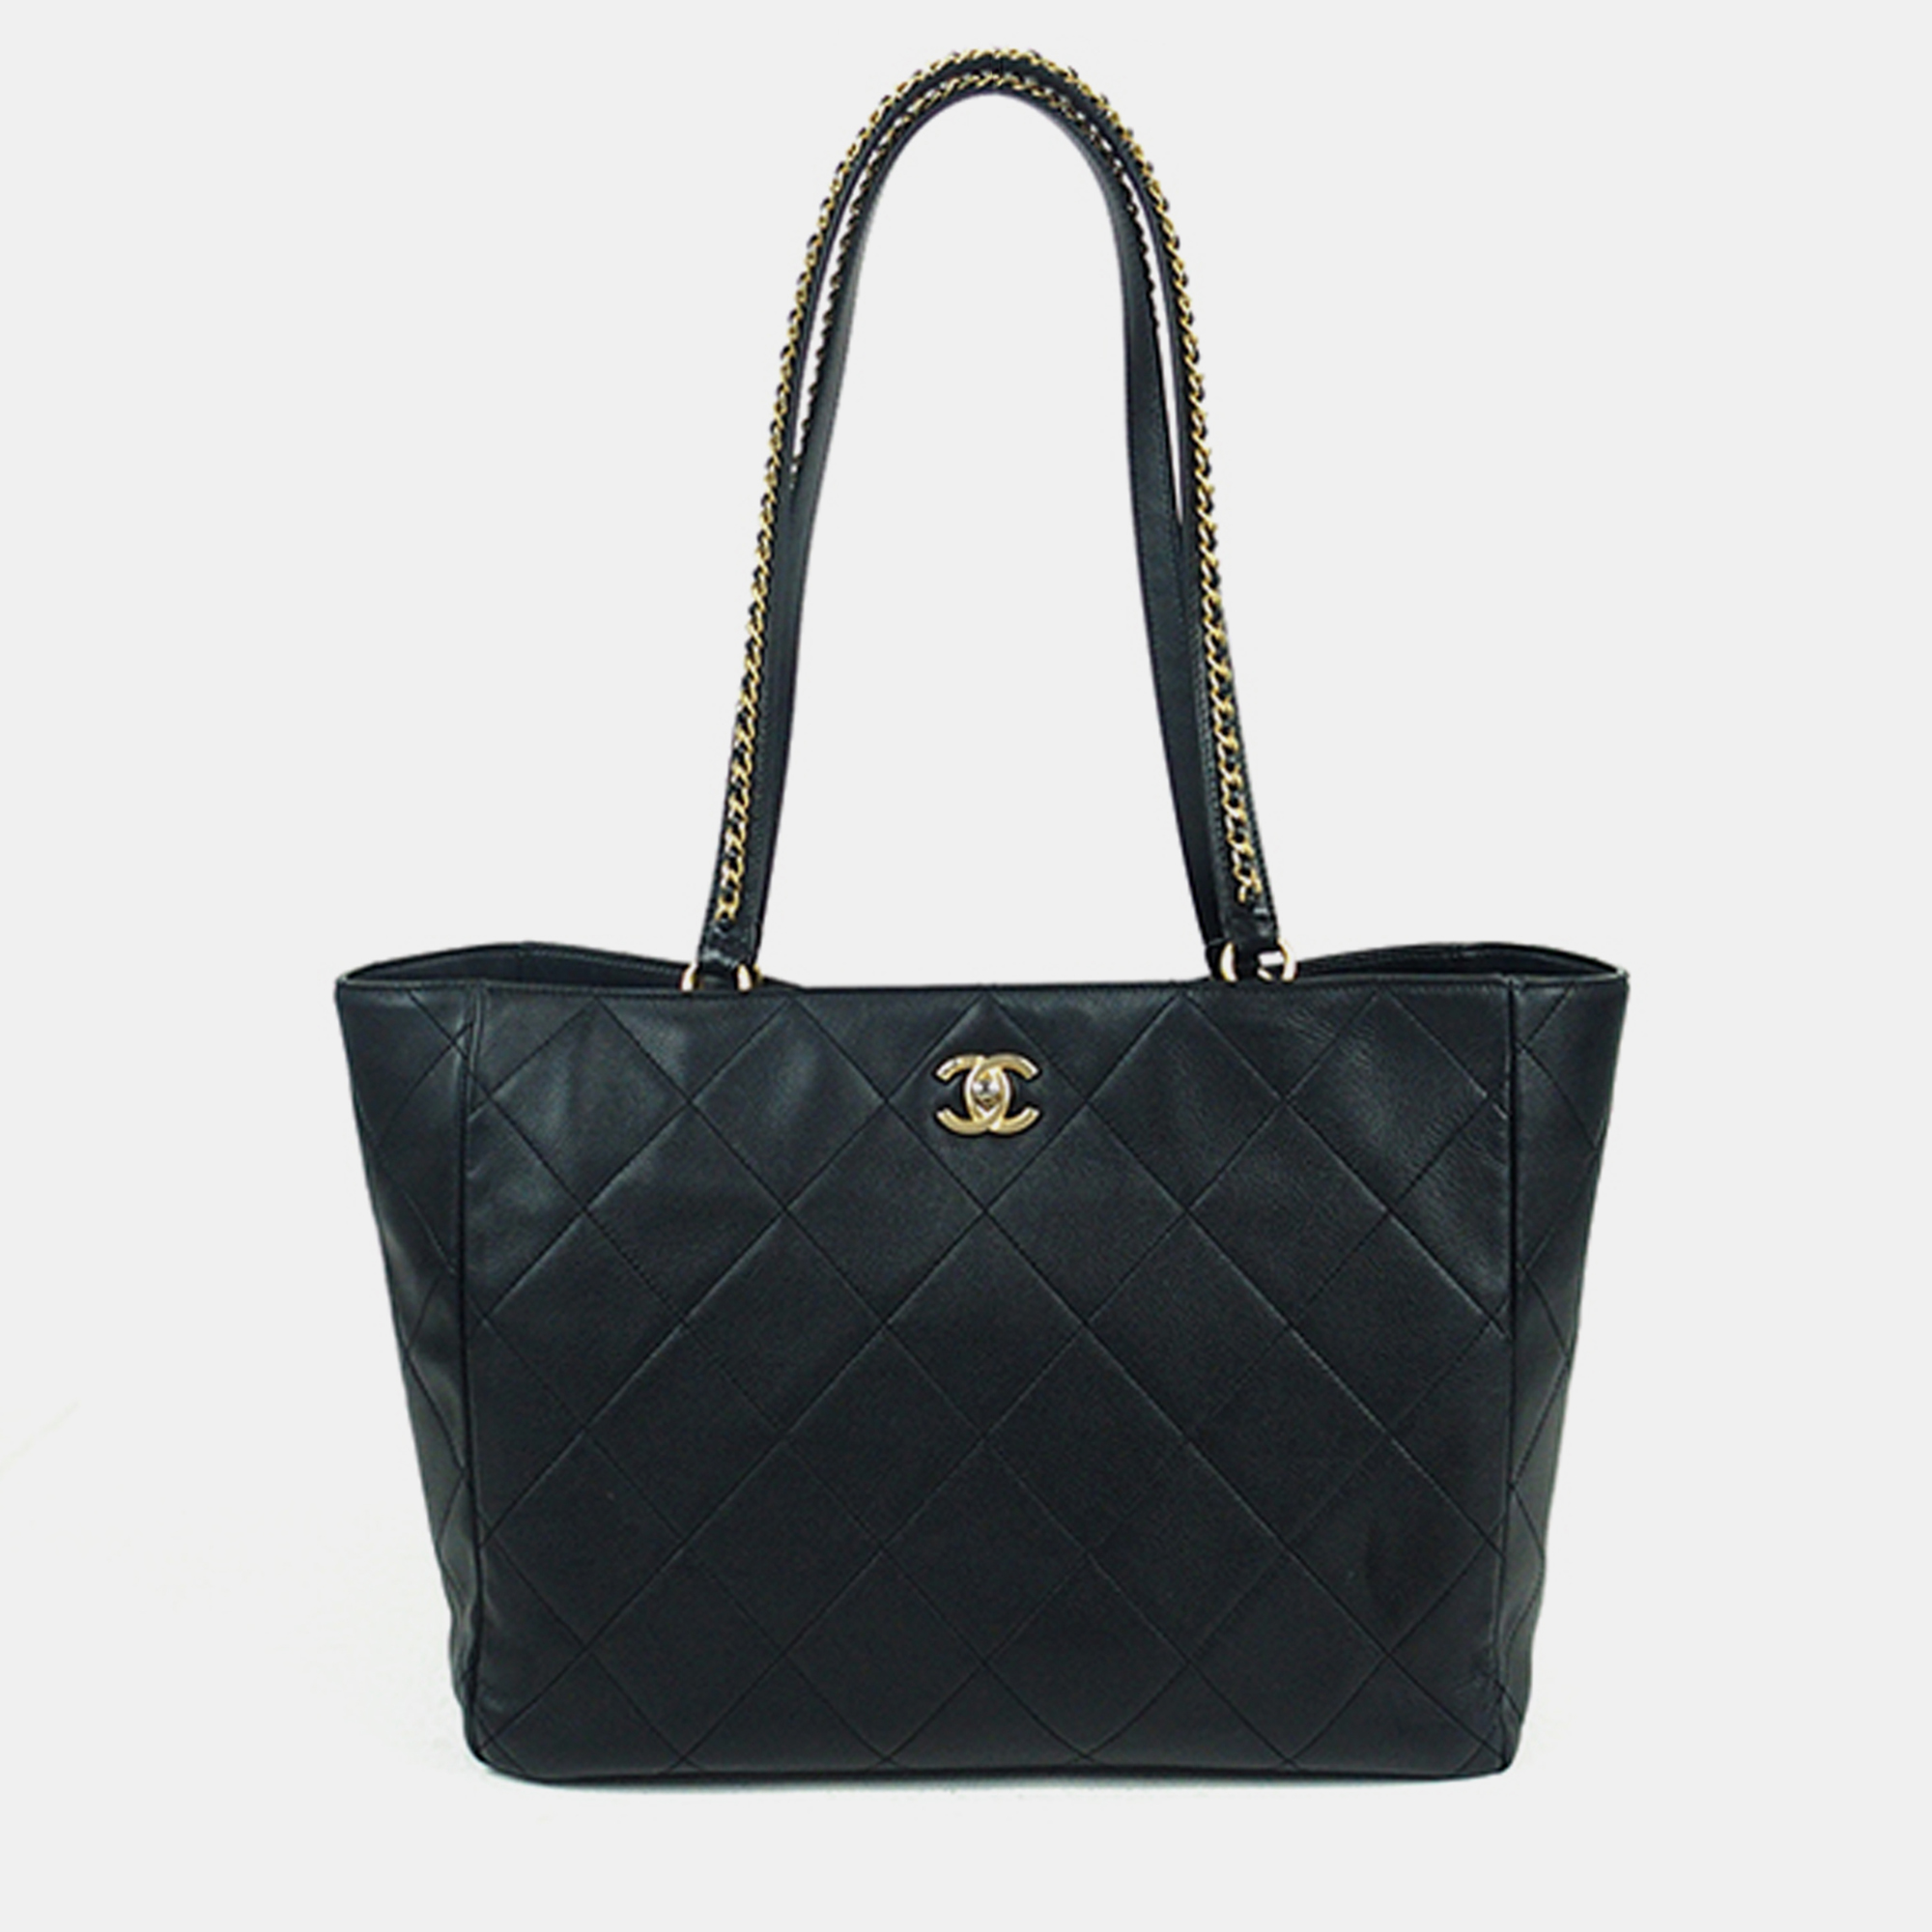 Chanel cc quilted lambskin tote bag